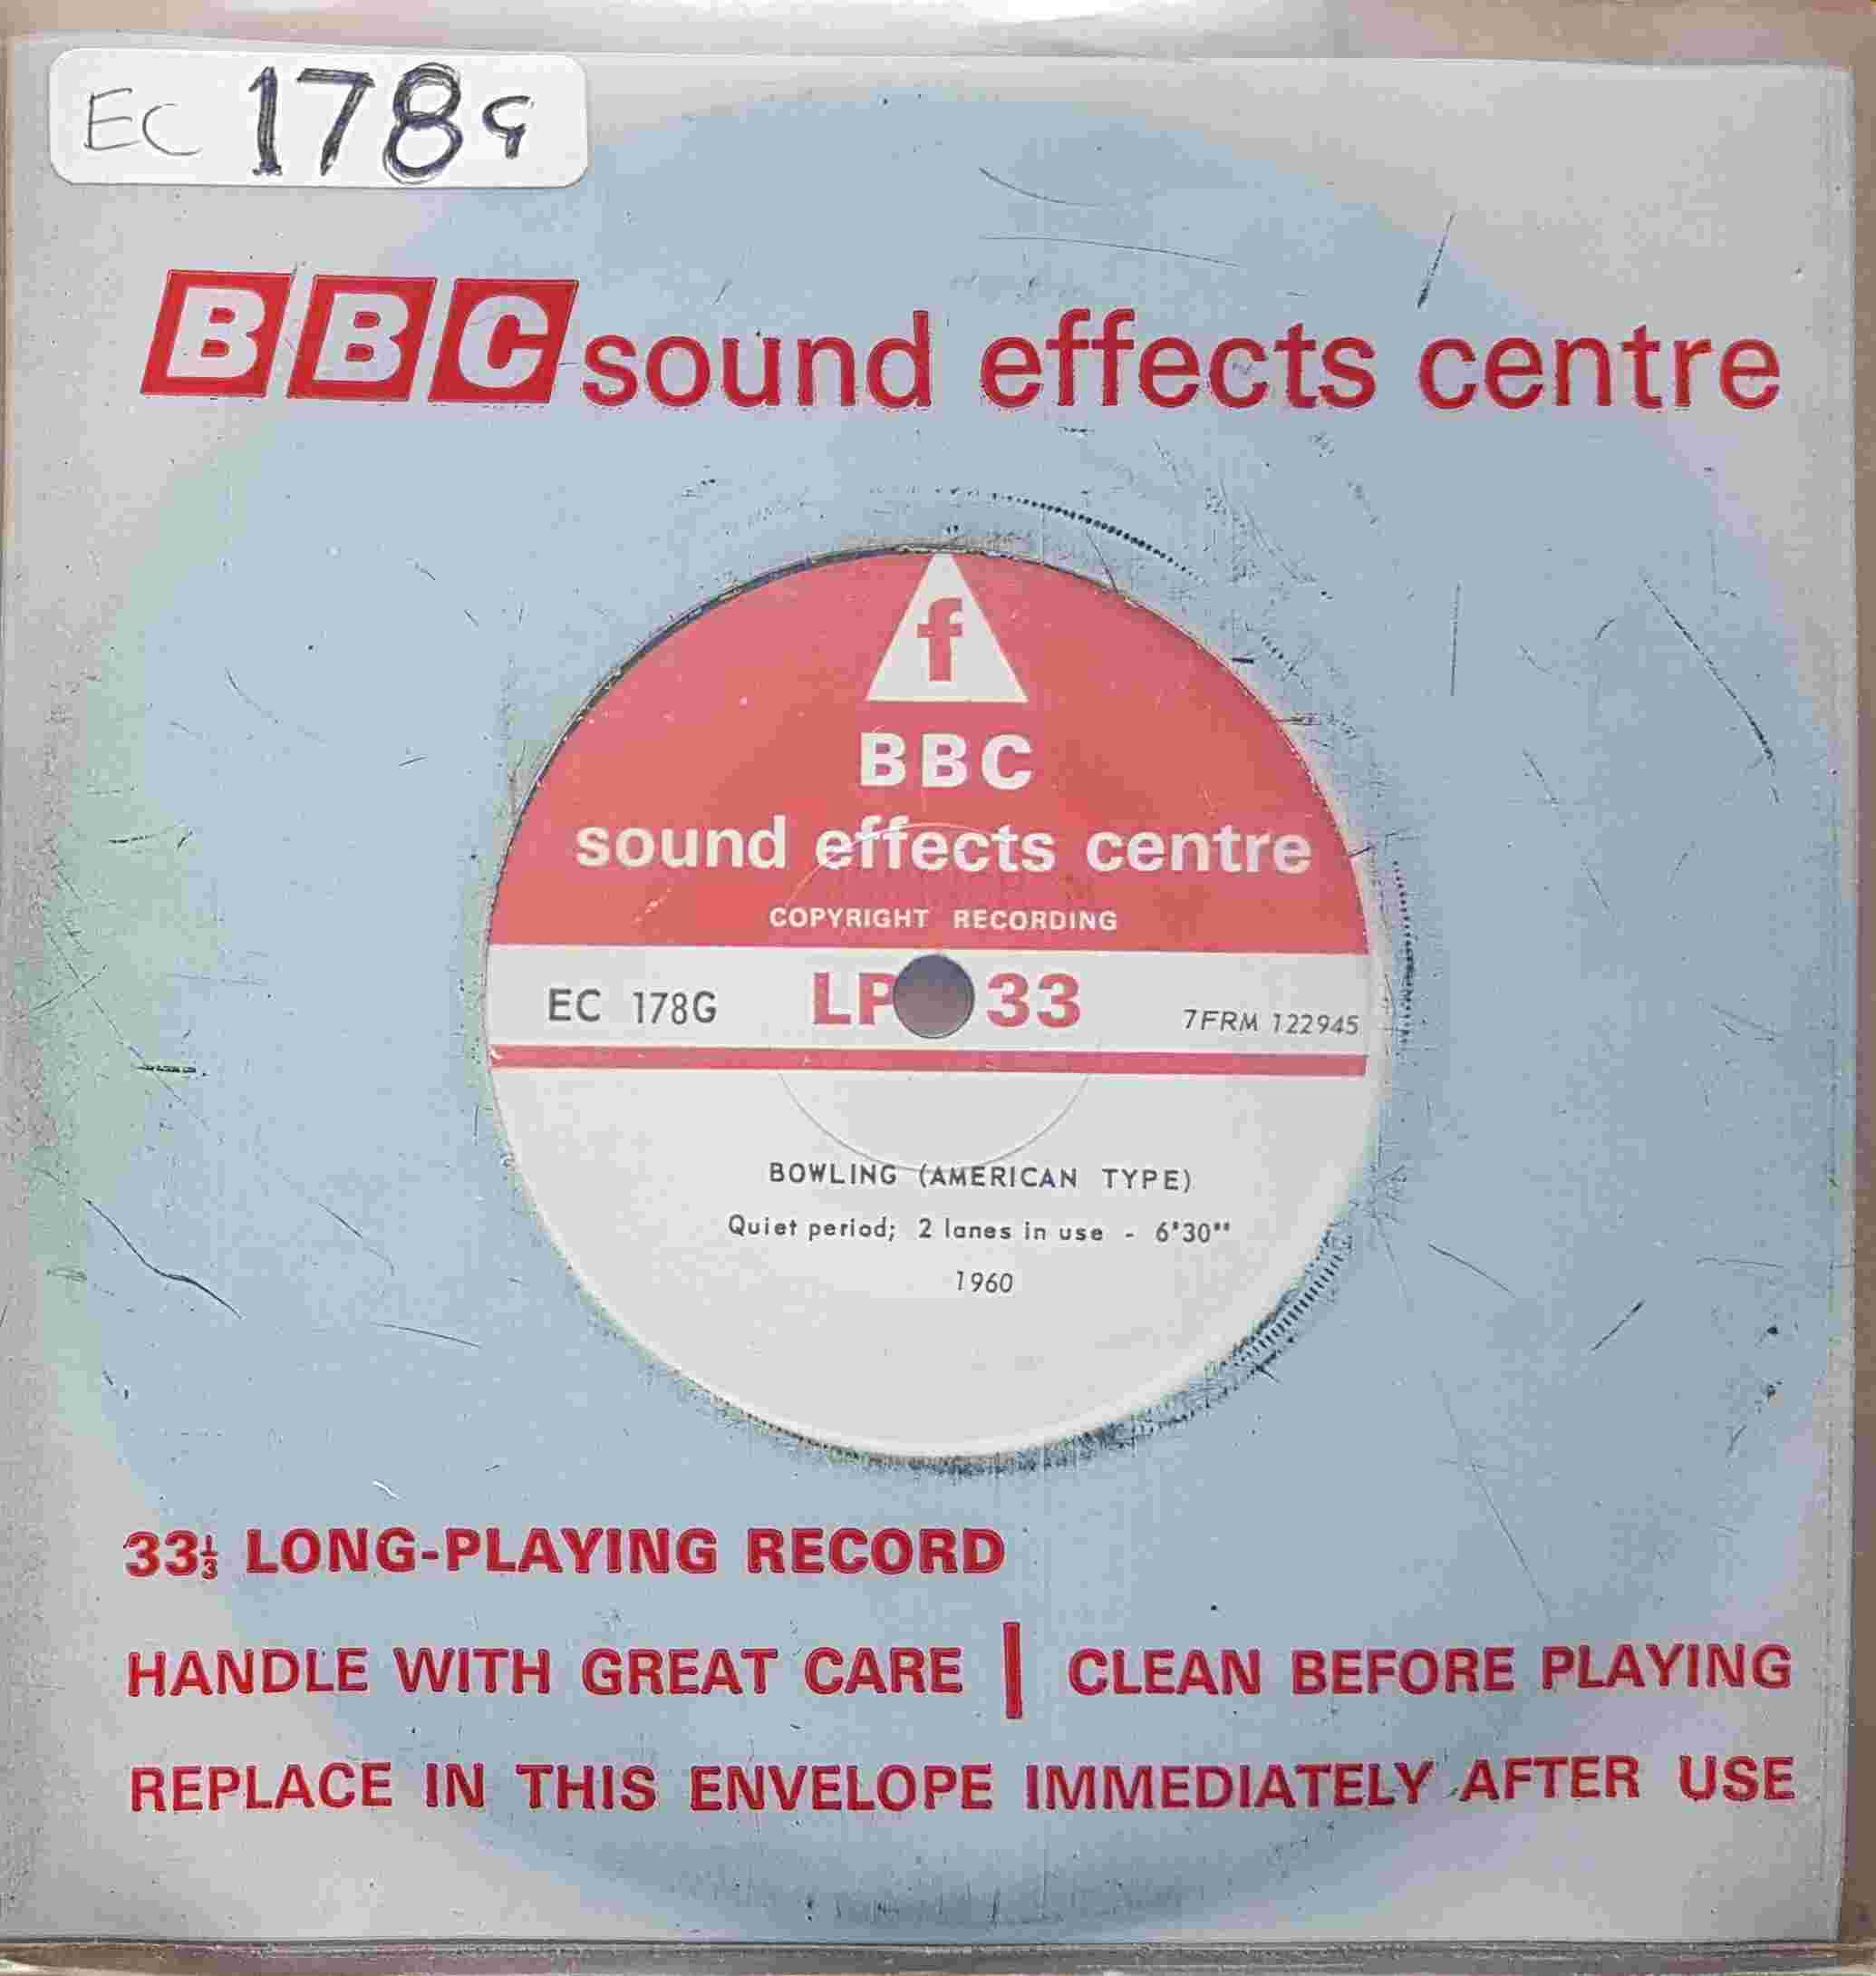 Picture of EC 178G Bowling (American type) by artist Not registered from the BBC singles - Records and Tapes library